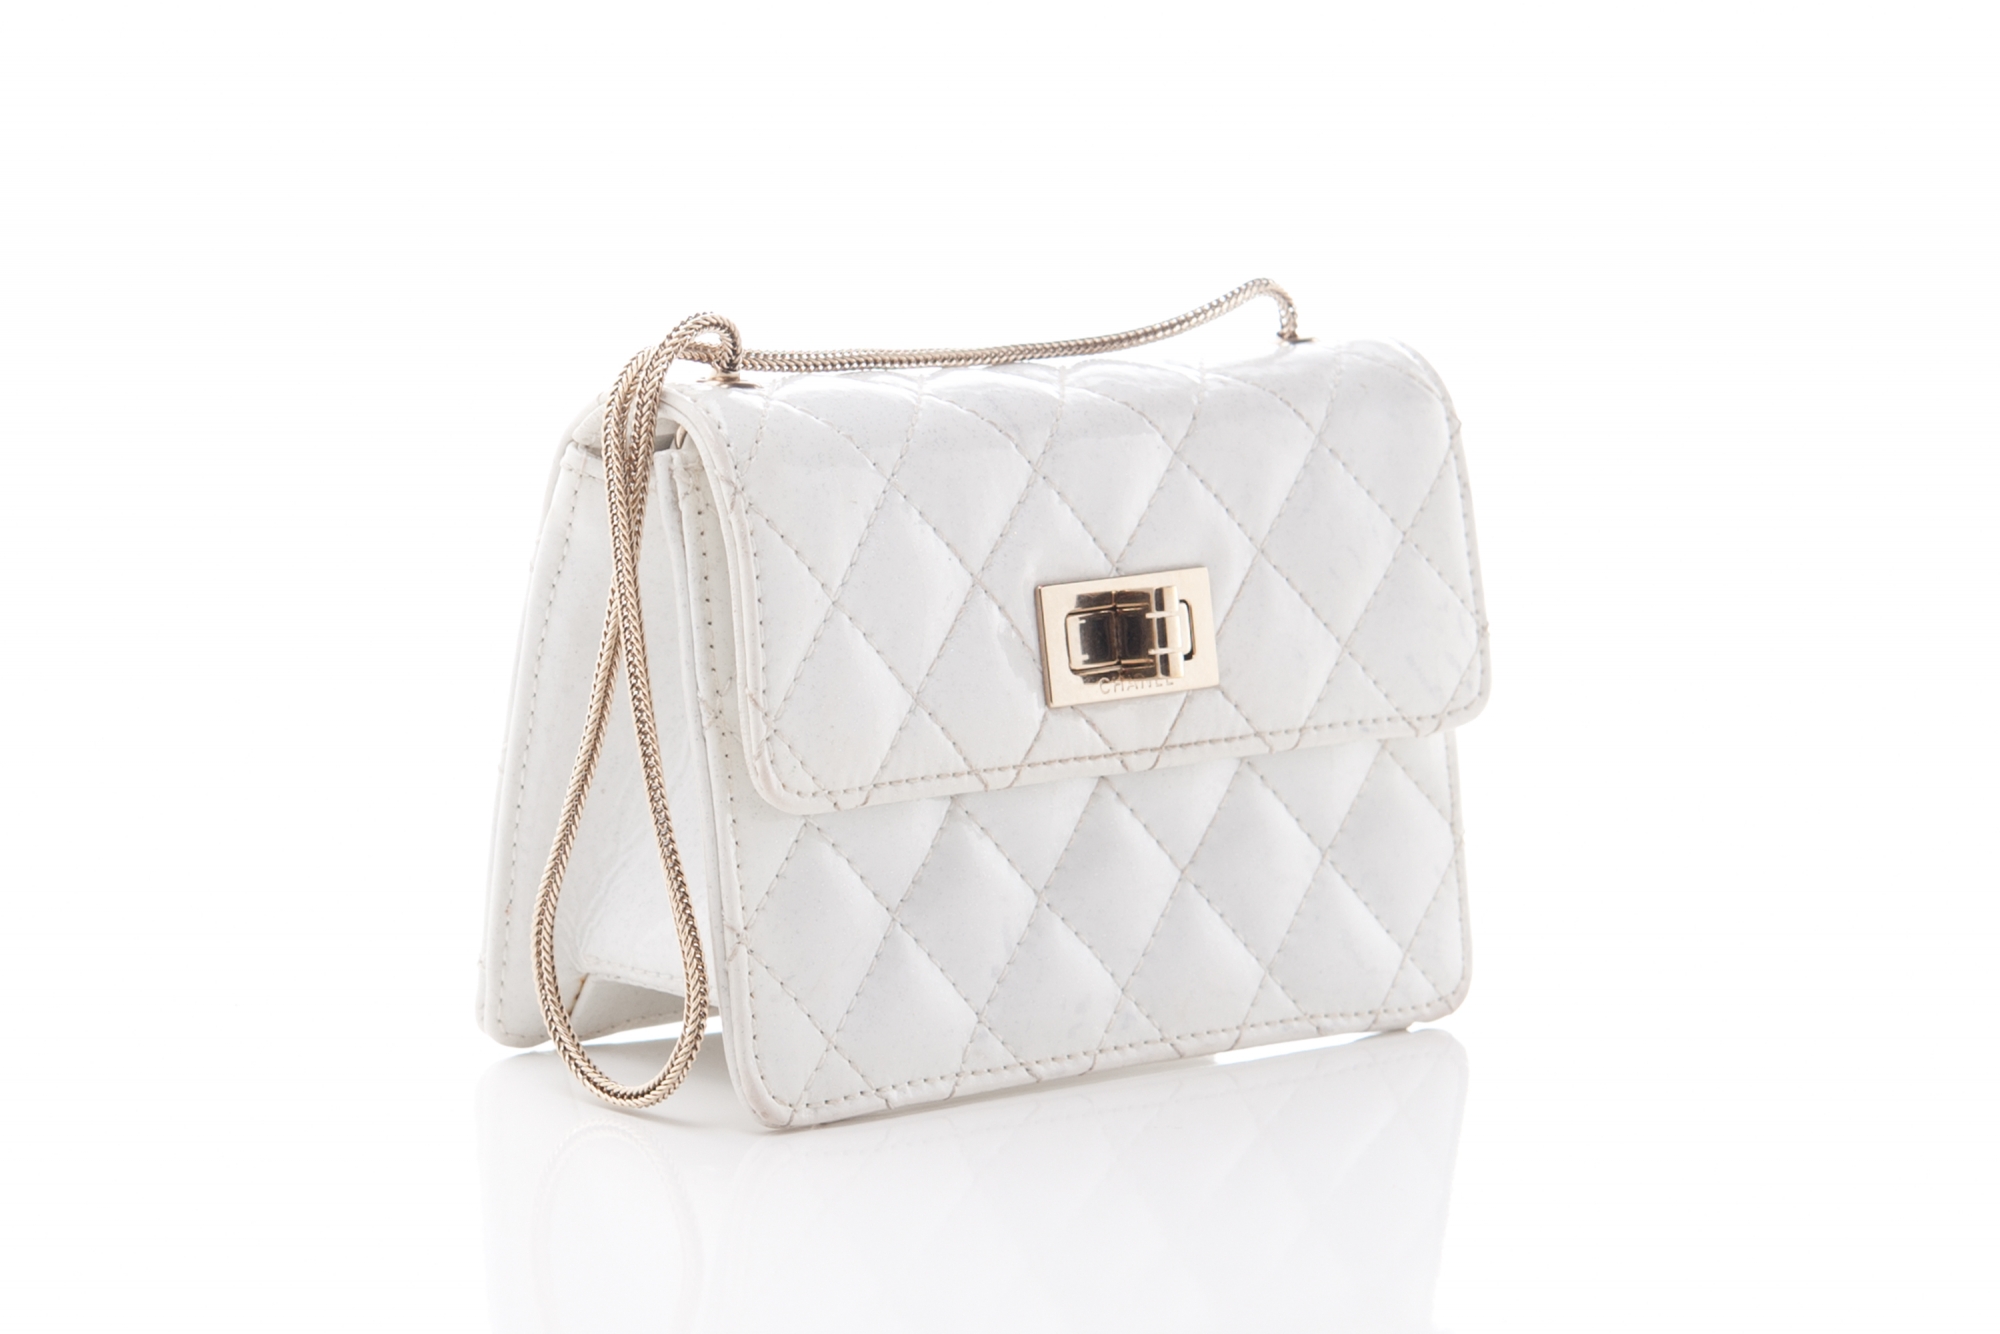 Chanel White Quilted Patent Leather 2.55 Reissue Mini Flap Bag - Chanel